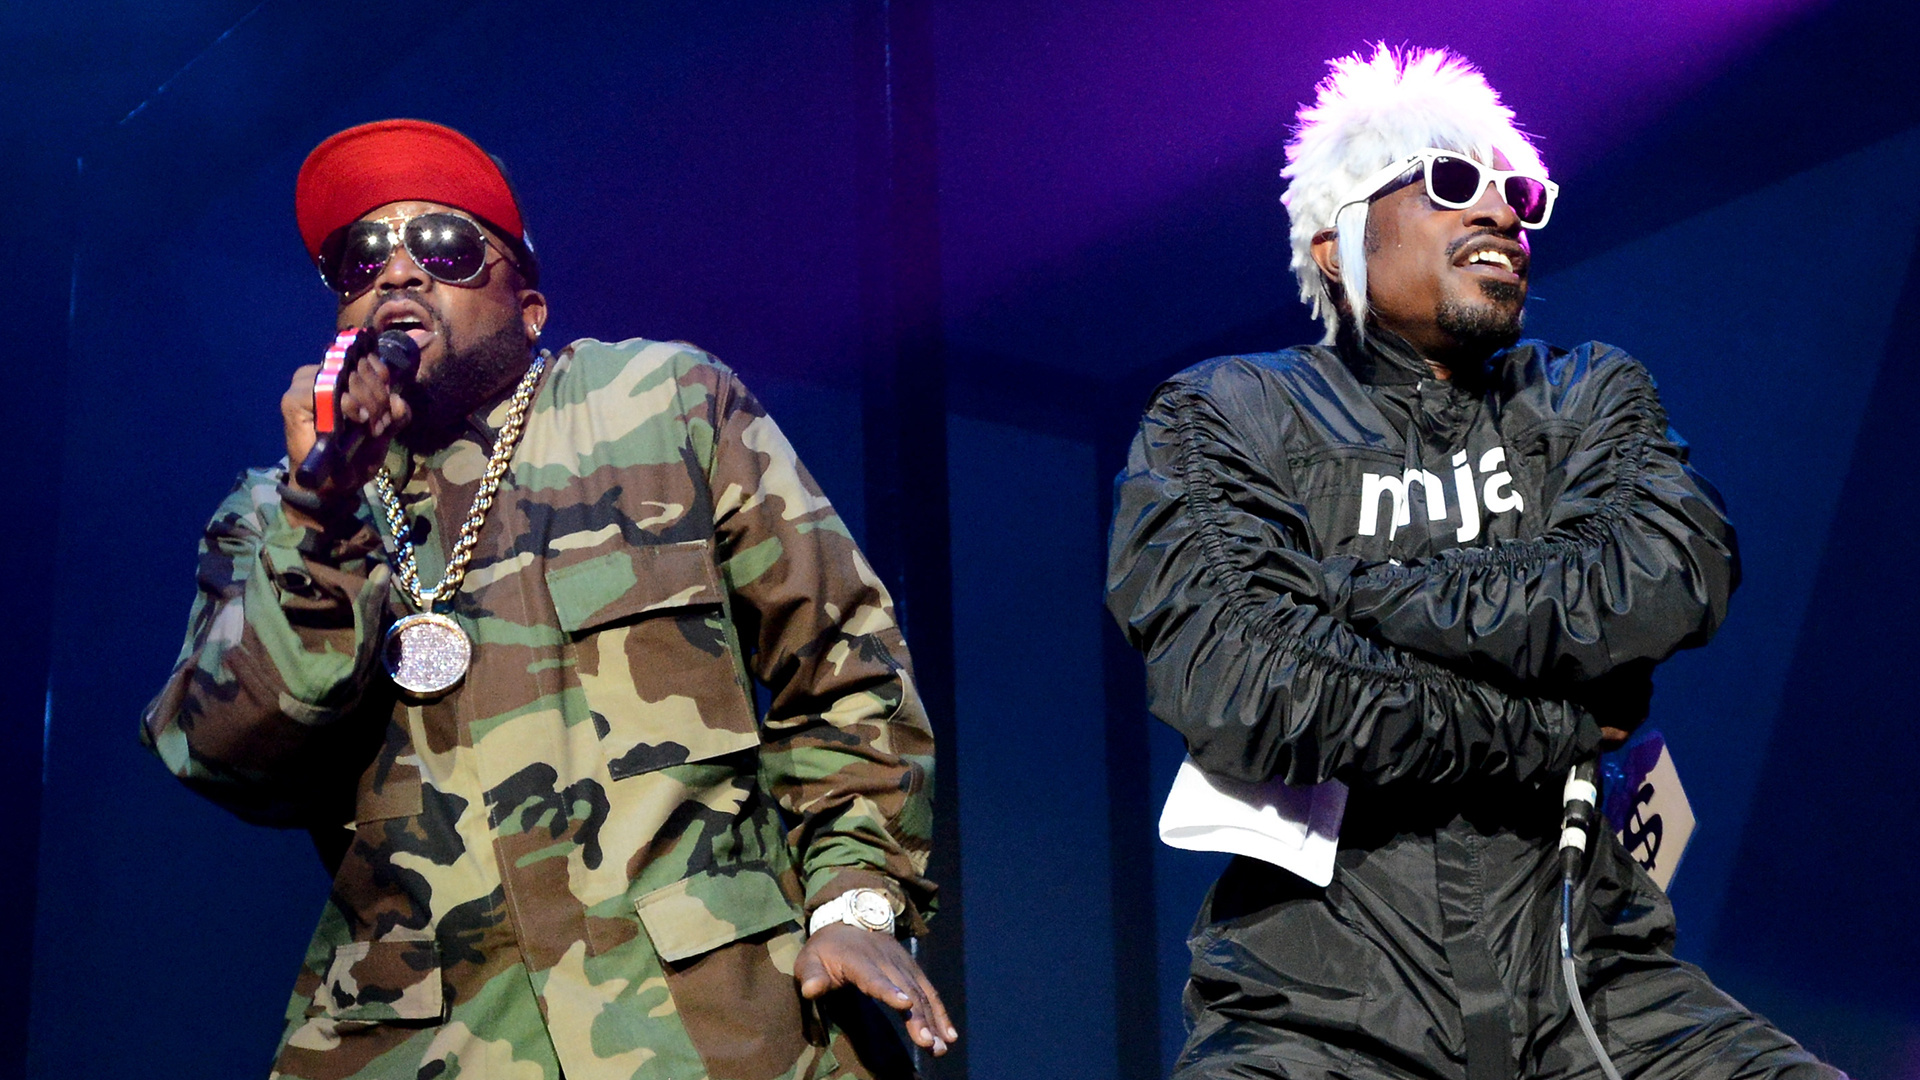 OutKast, Music group, Concert review, BET Experience, 1920x1080 Full HD Desktop